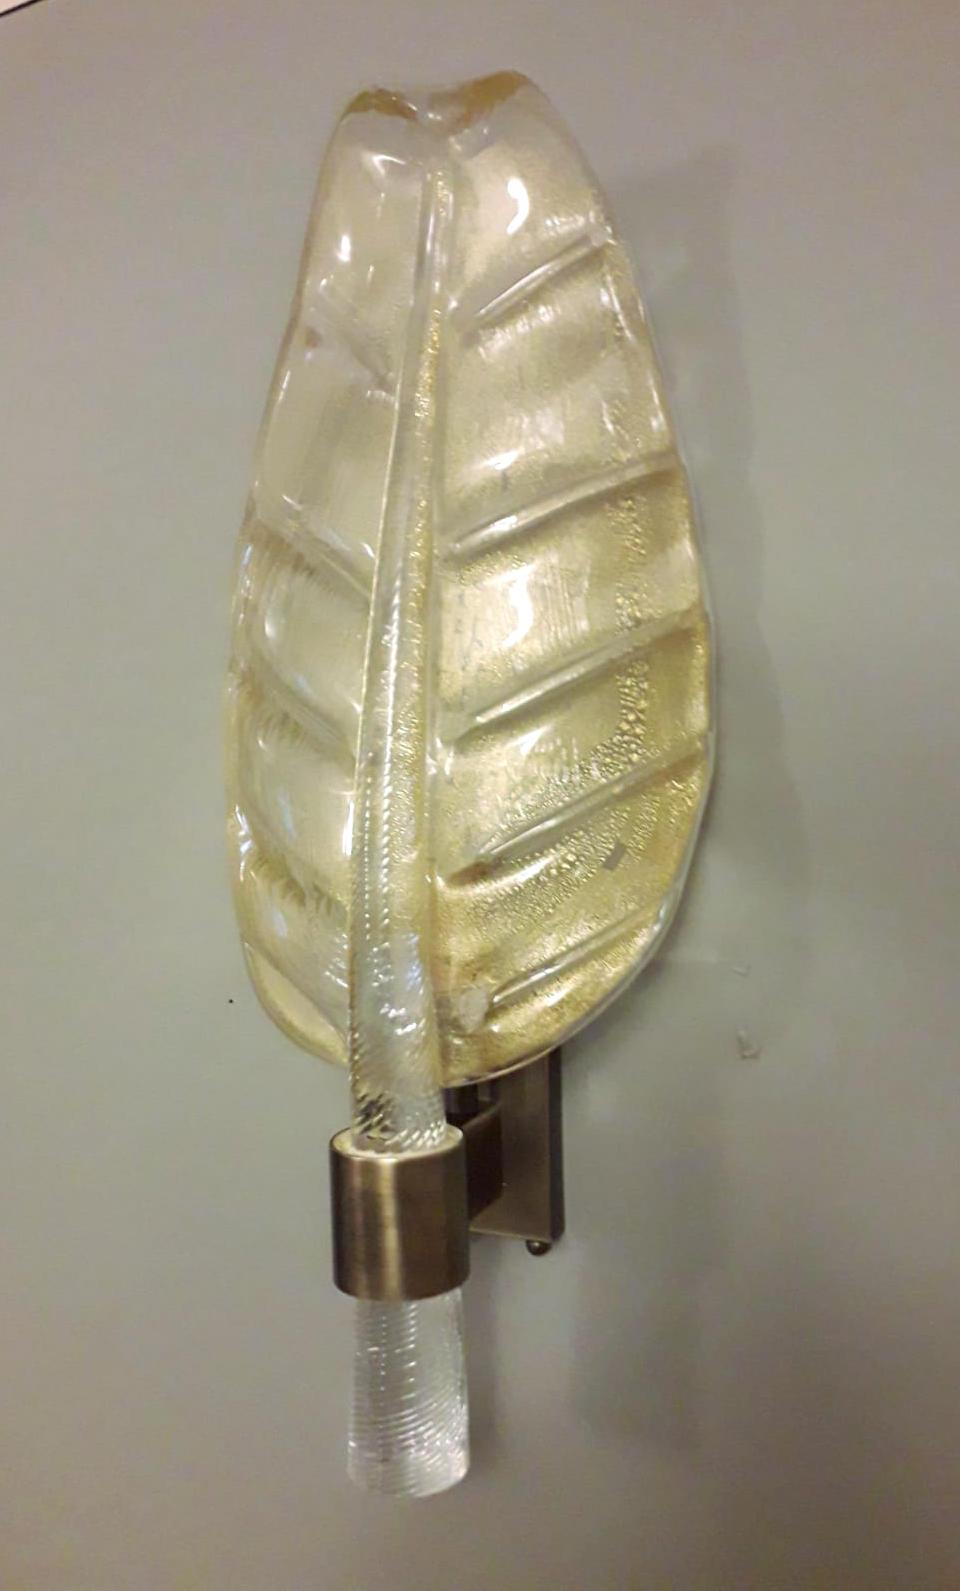 Italian leaf shaped wall light shown in hand blown murano glass infused with 24-karat gold flecks mounted on bronze frame / Made in Italy by Barovier e Toso, circa 1950s
1 light / E12 or E14 type / max 40W
Measures: Height 20 inches / width 8 inches